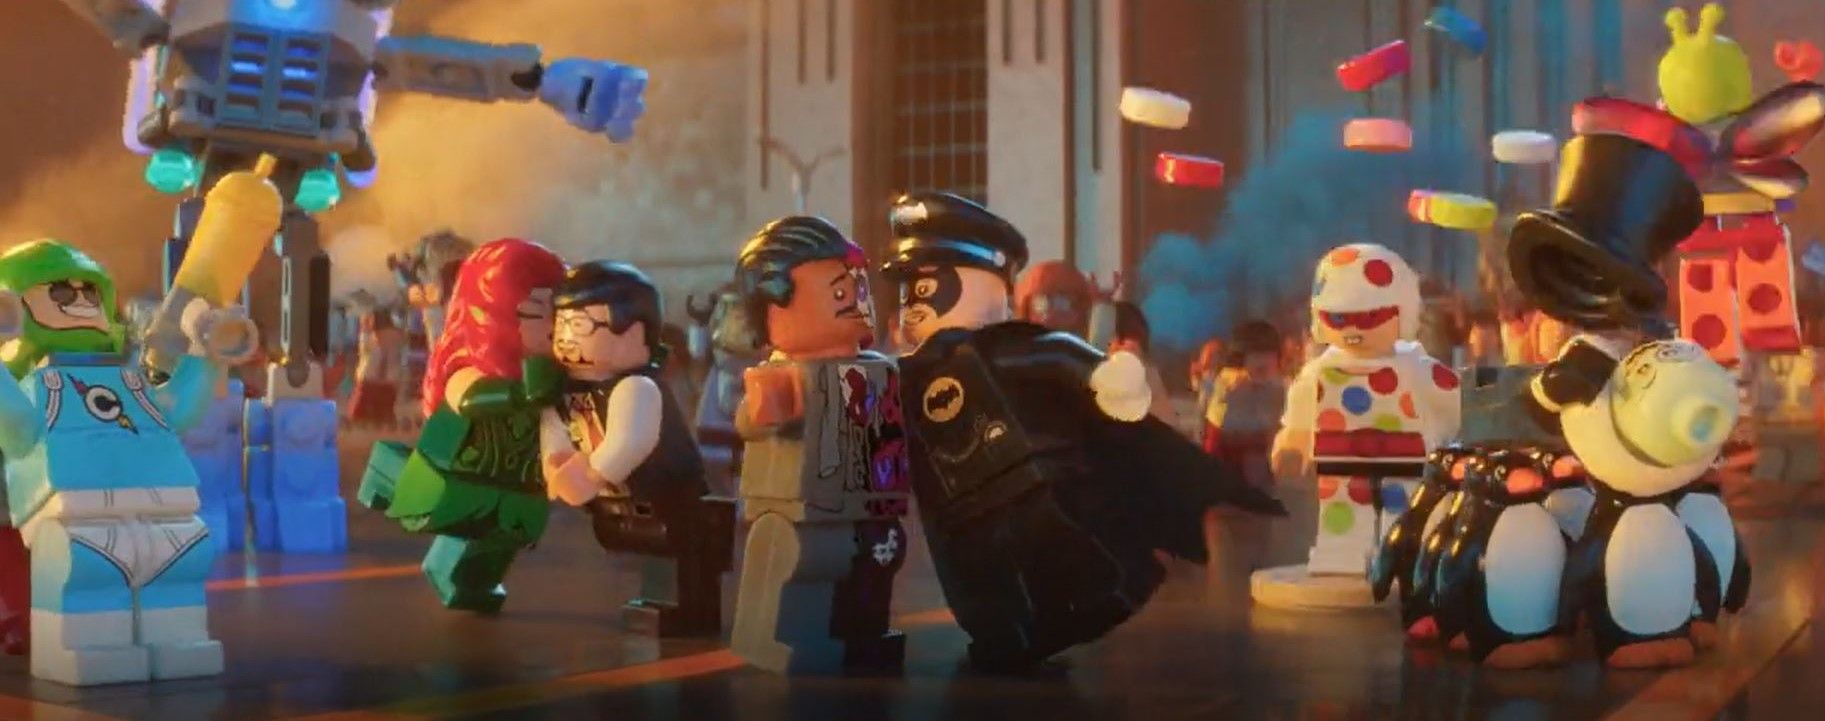 Two Face Kisses Alfred in The Batman Lego Movie